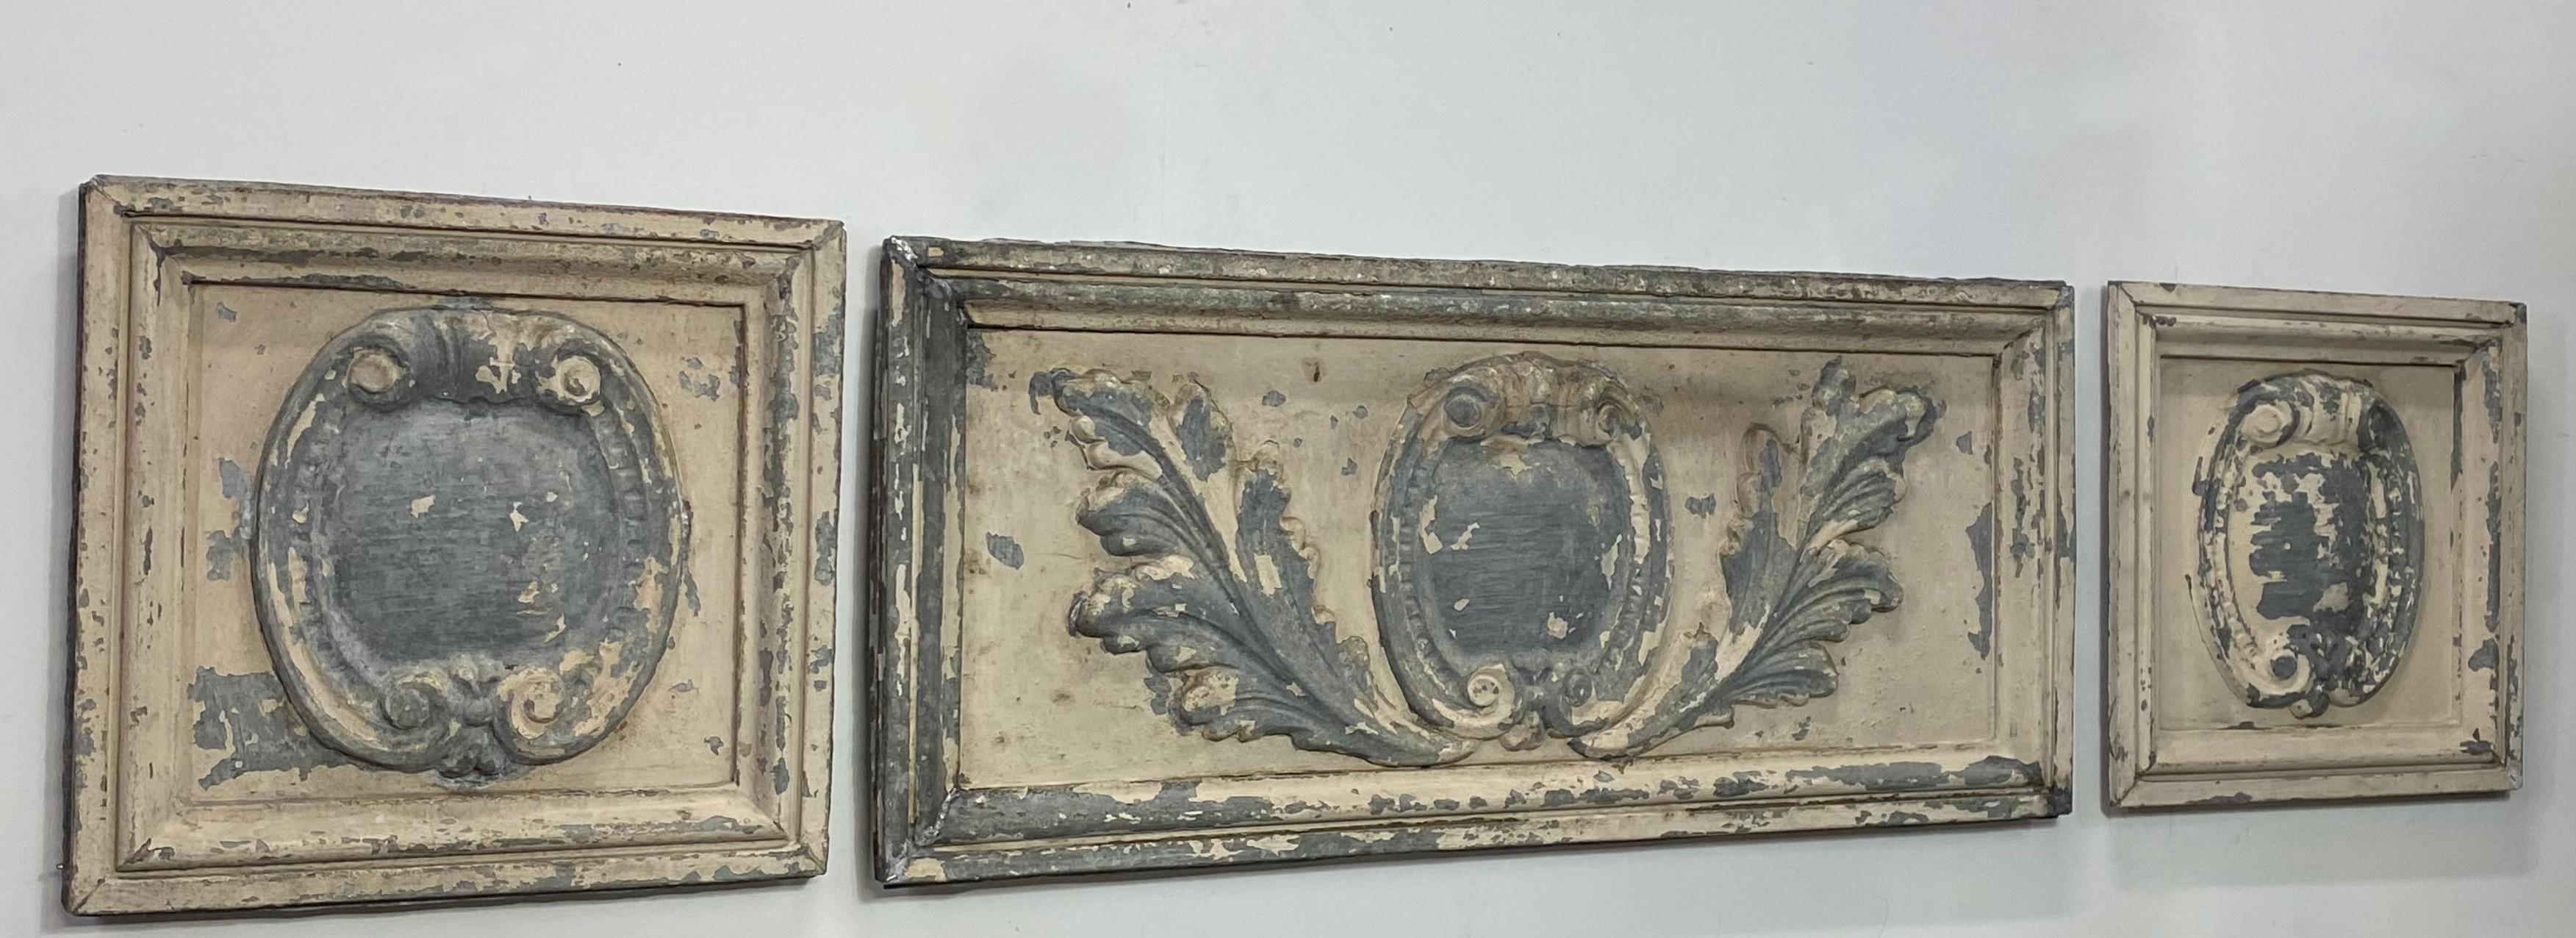 Antique Architectural Element Tin Panels Wall Art, Late 19th Century 1